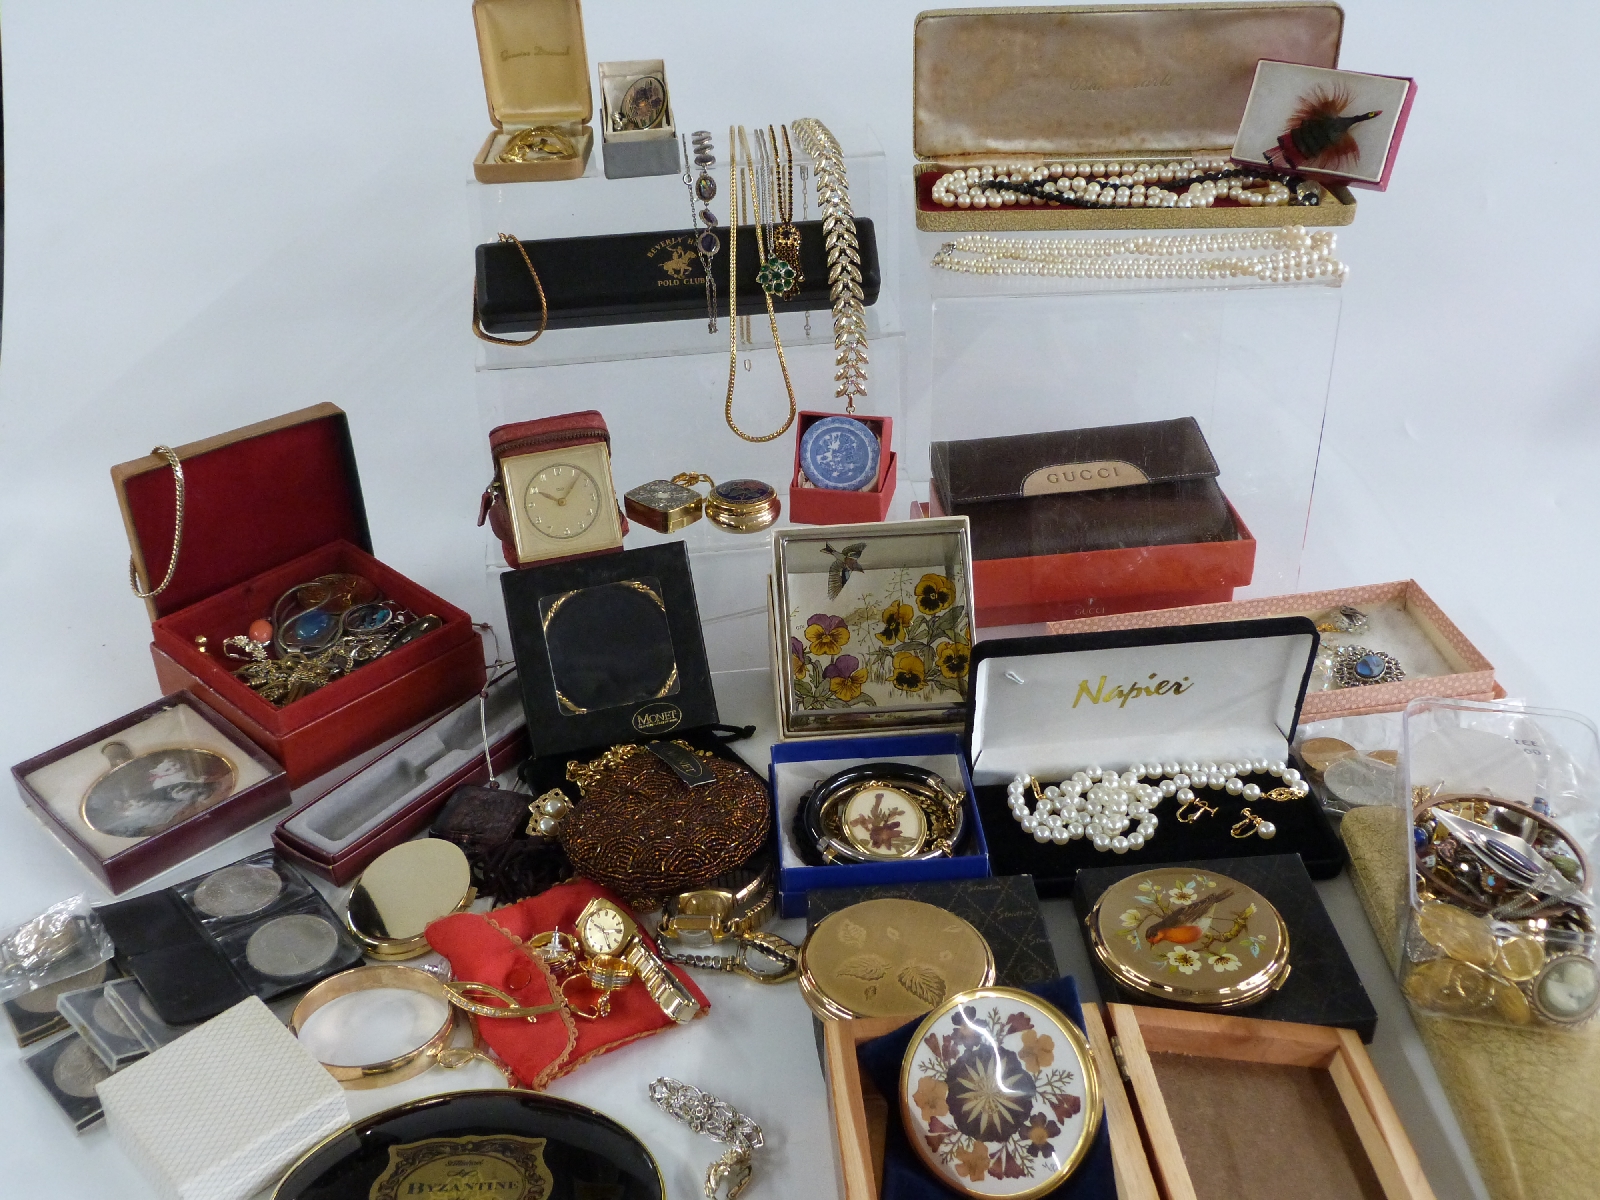 A collection of costume jewellery including Monet, Napier, Stratton compacts, brooches, necklaces,